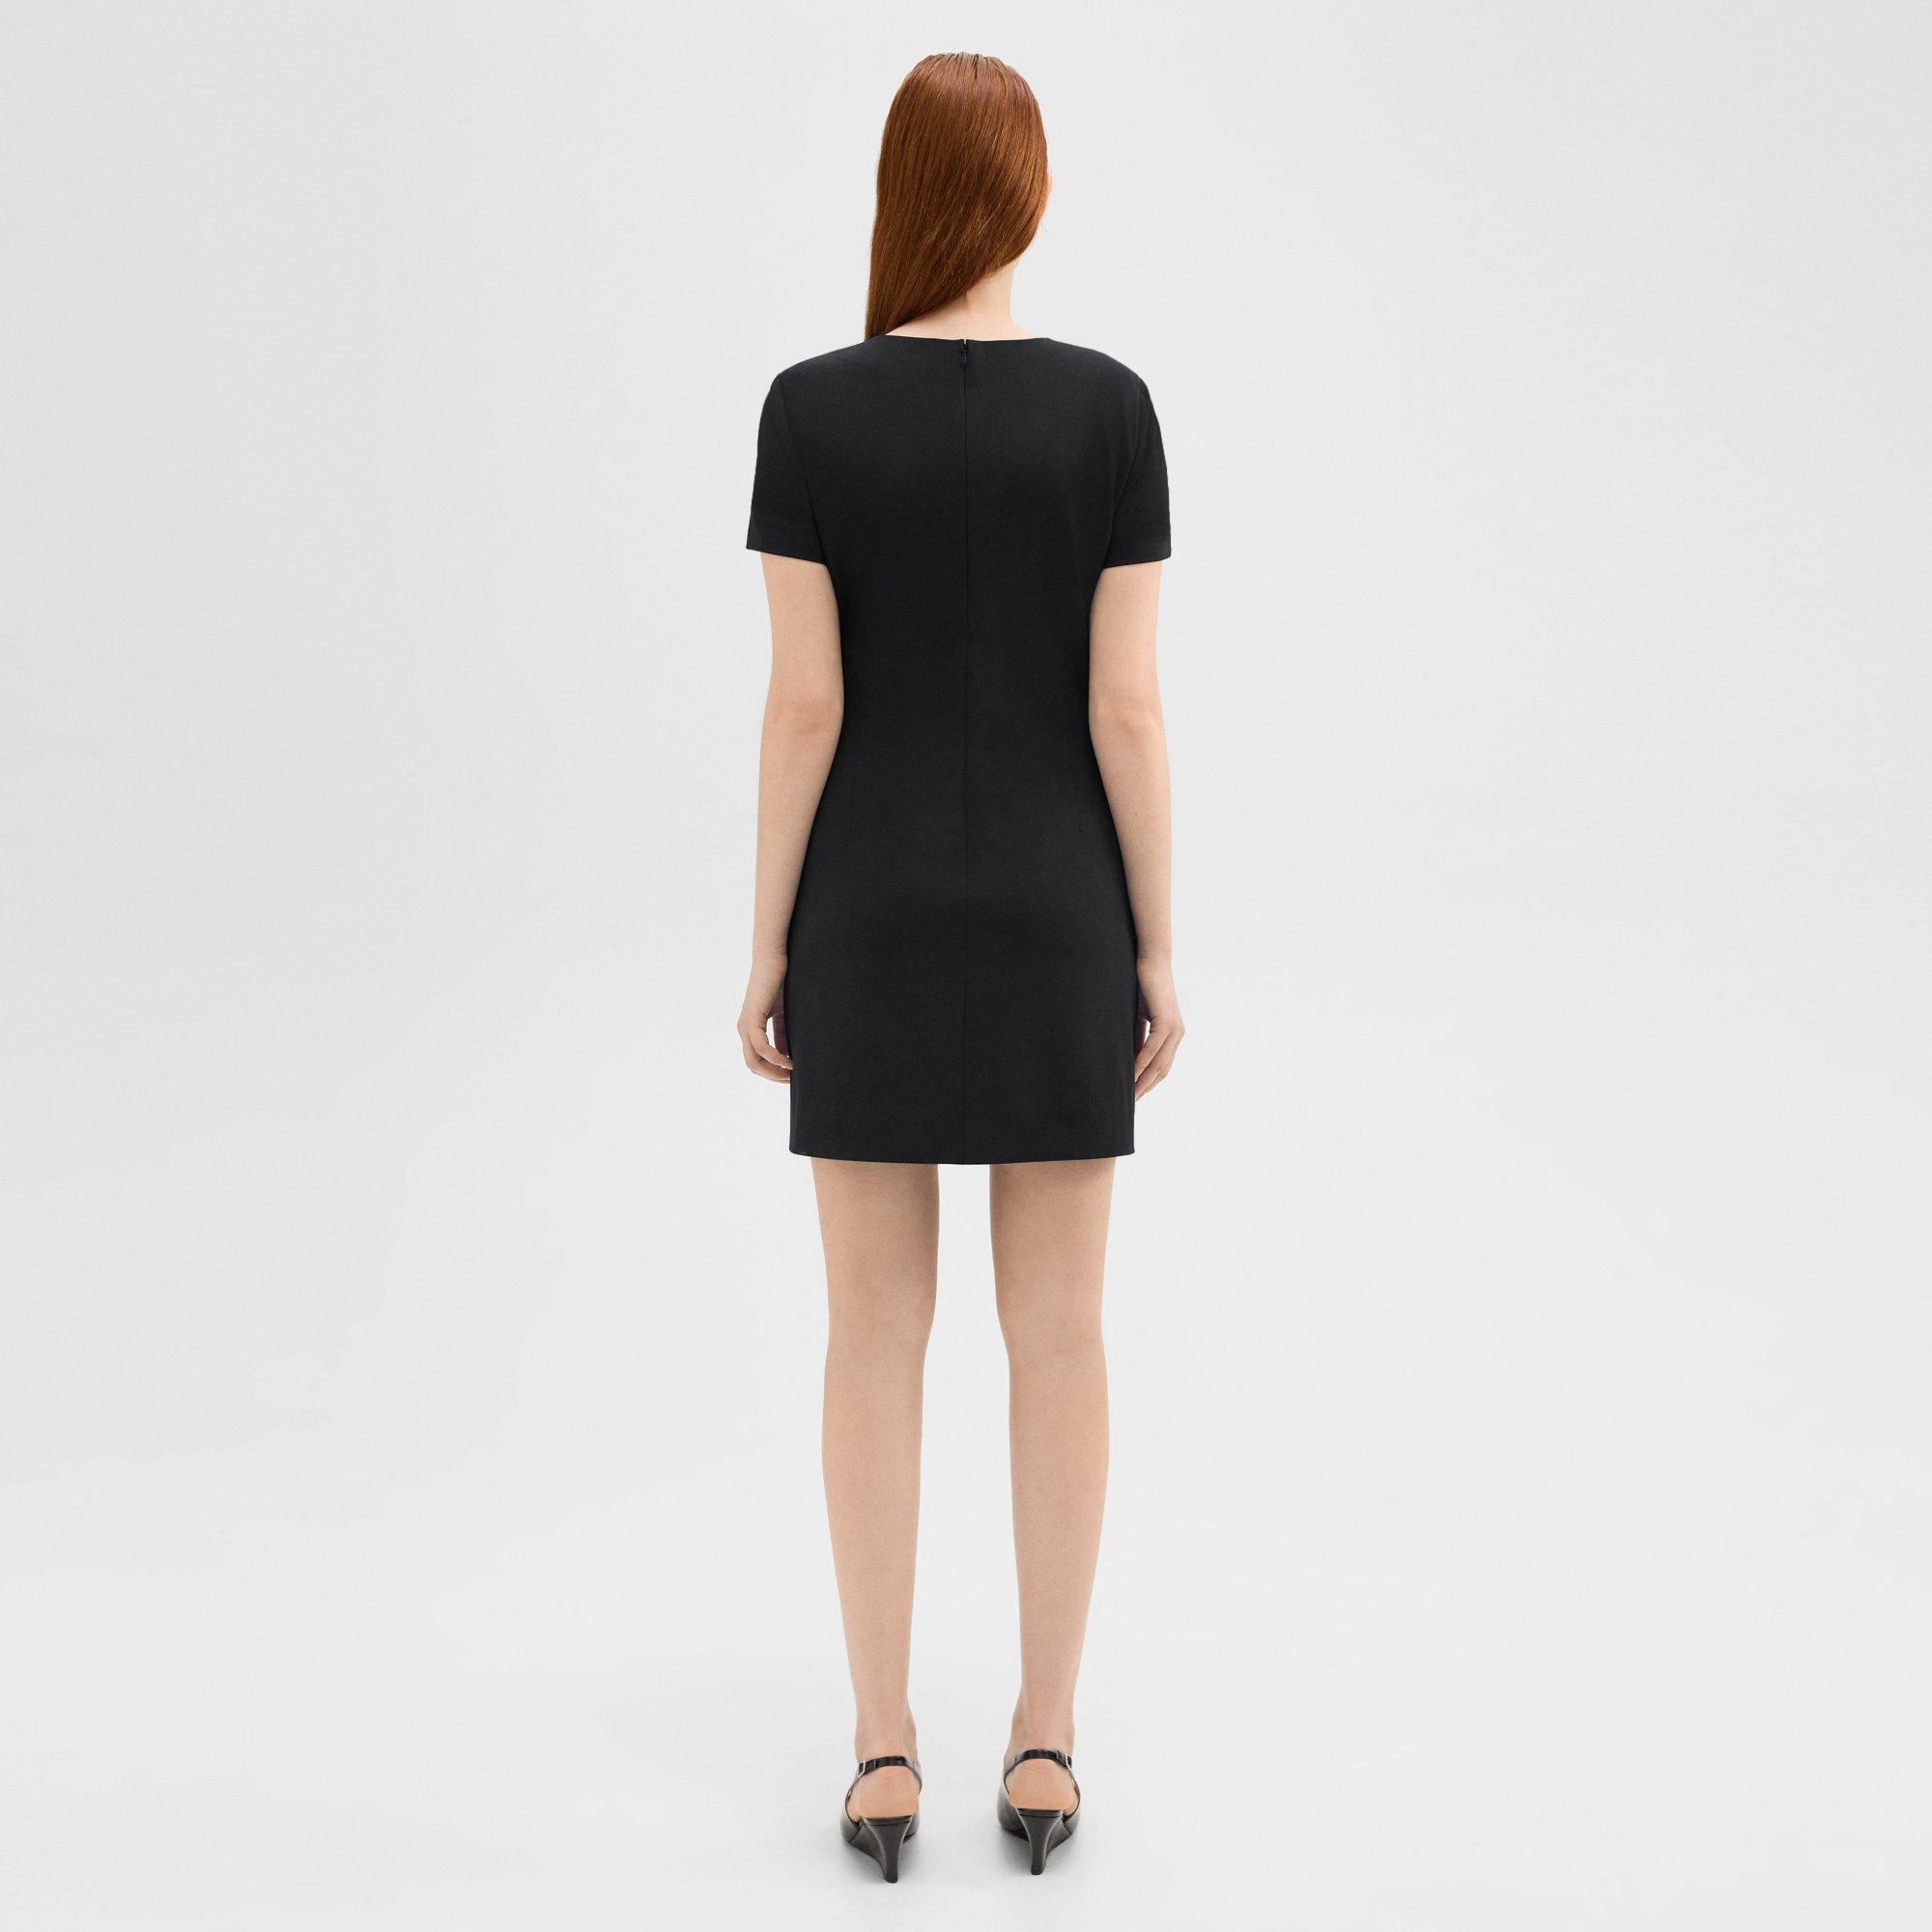 What's the difference between shift & sheath dresses?